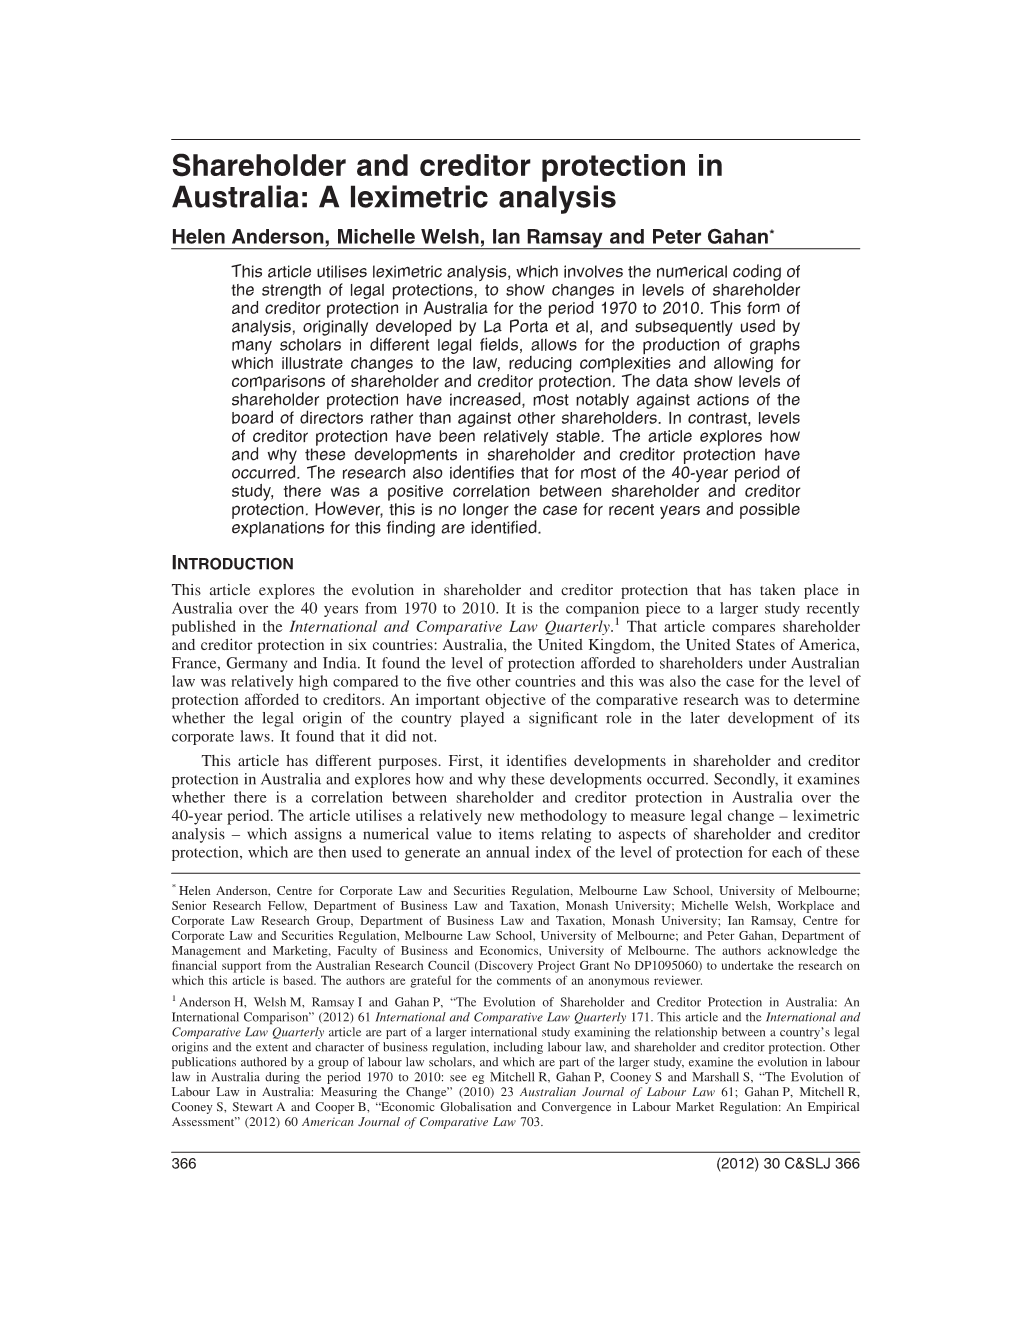 Shareholder and Creditor Protection in Australia: a Leximetric Analysis Helen Anderson, Michelle Welsh, Ian Ramsay and Peter Gahan*